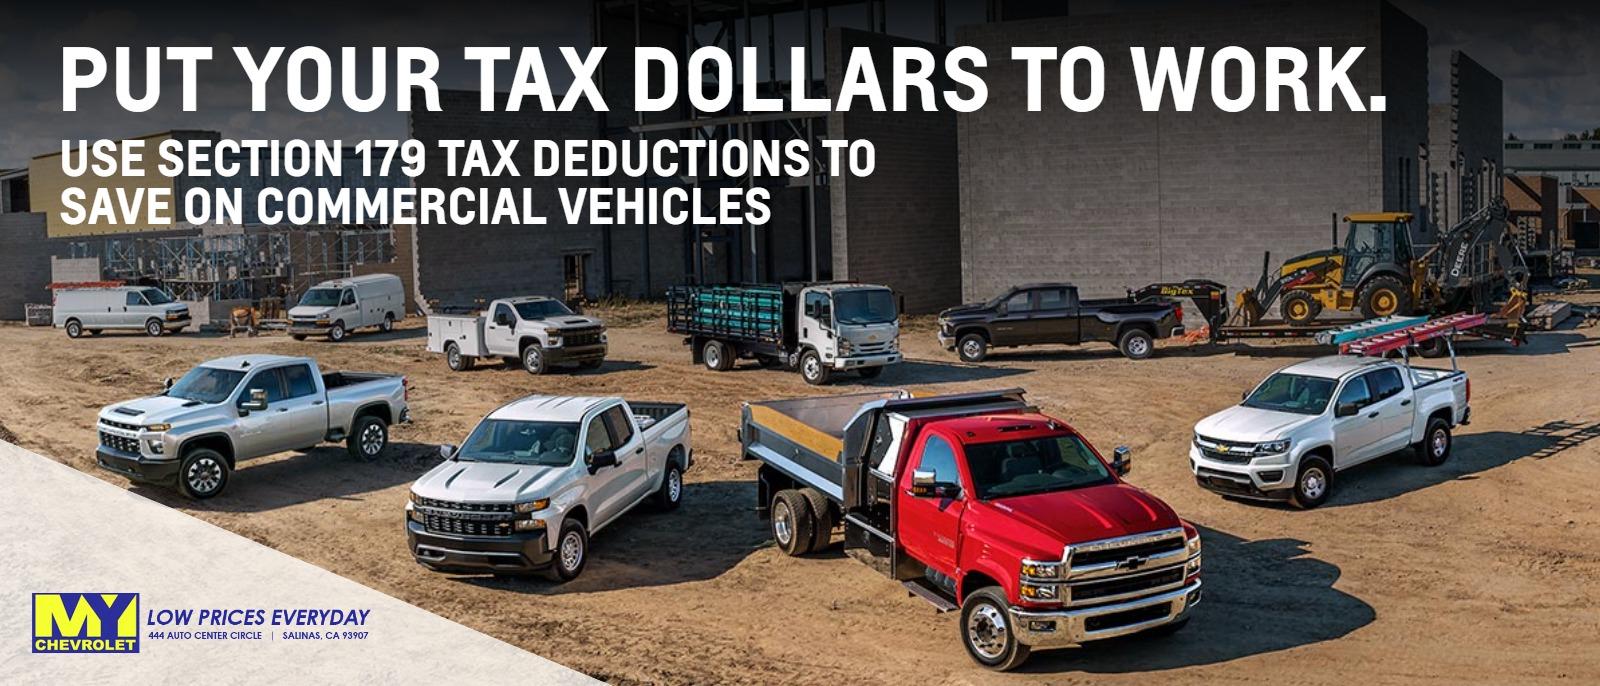 Put Your Tax Dollars to Work.
Use Section 179 Tax Deductions to SAVE on Commercial Vehicles